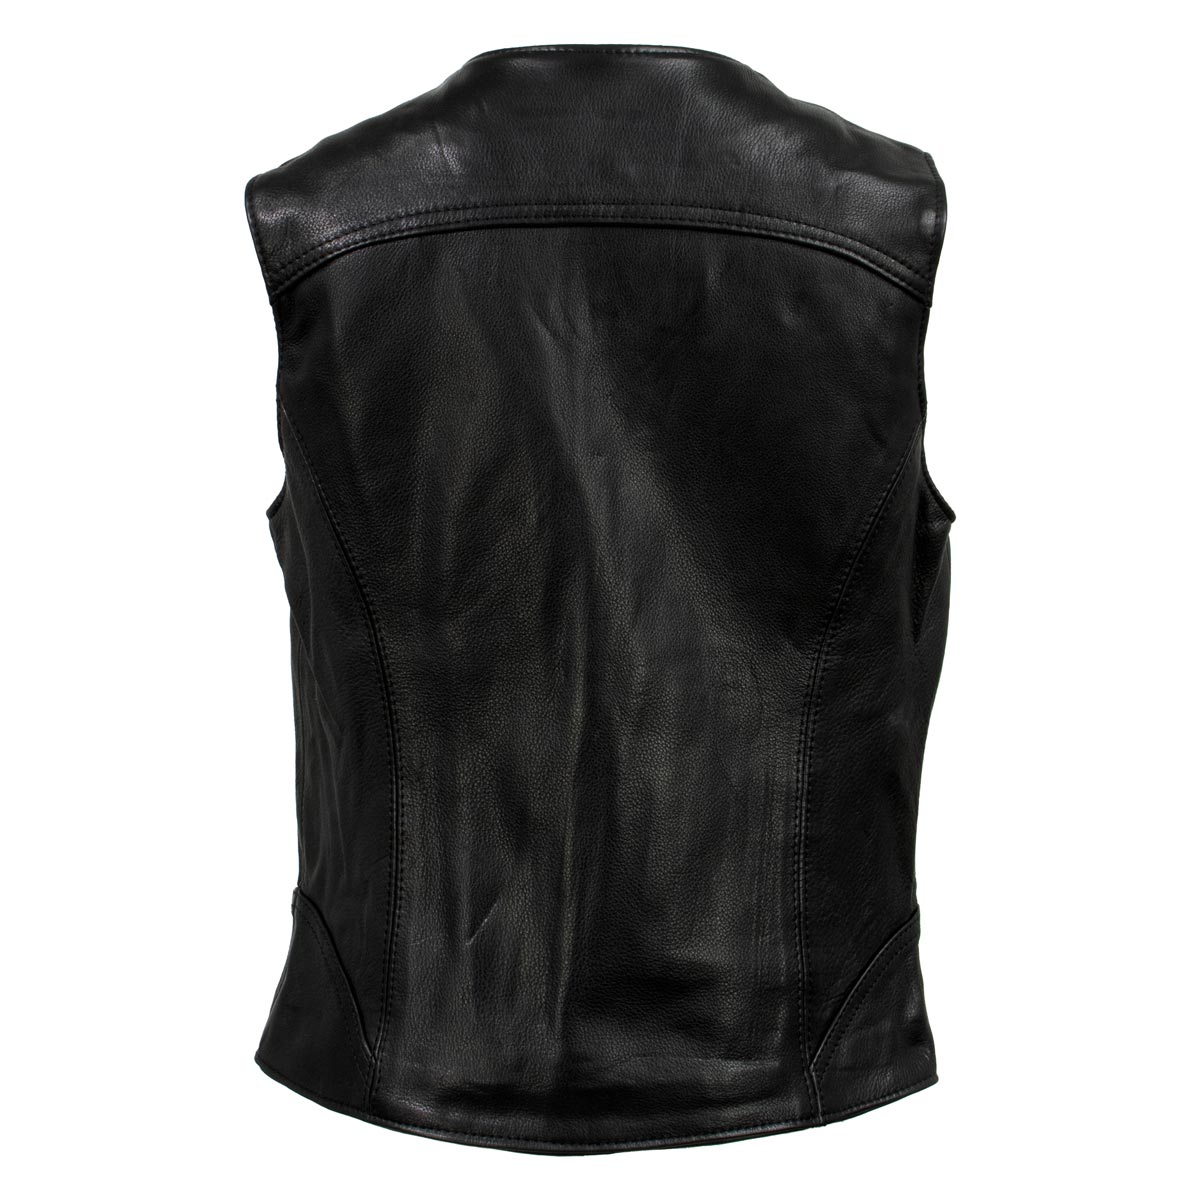 Milwaukee Leather USA MADE MLVSL5003 Women's Black 'Speed Queen' Motorcycle Leather Vest with Front Zipper